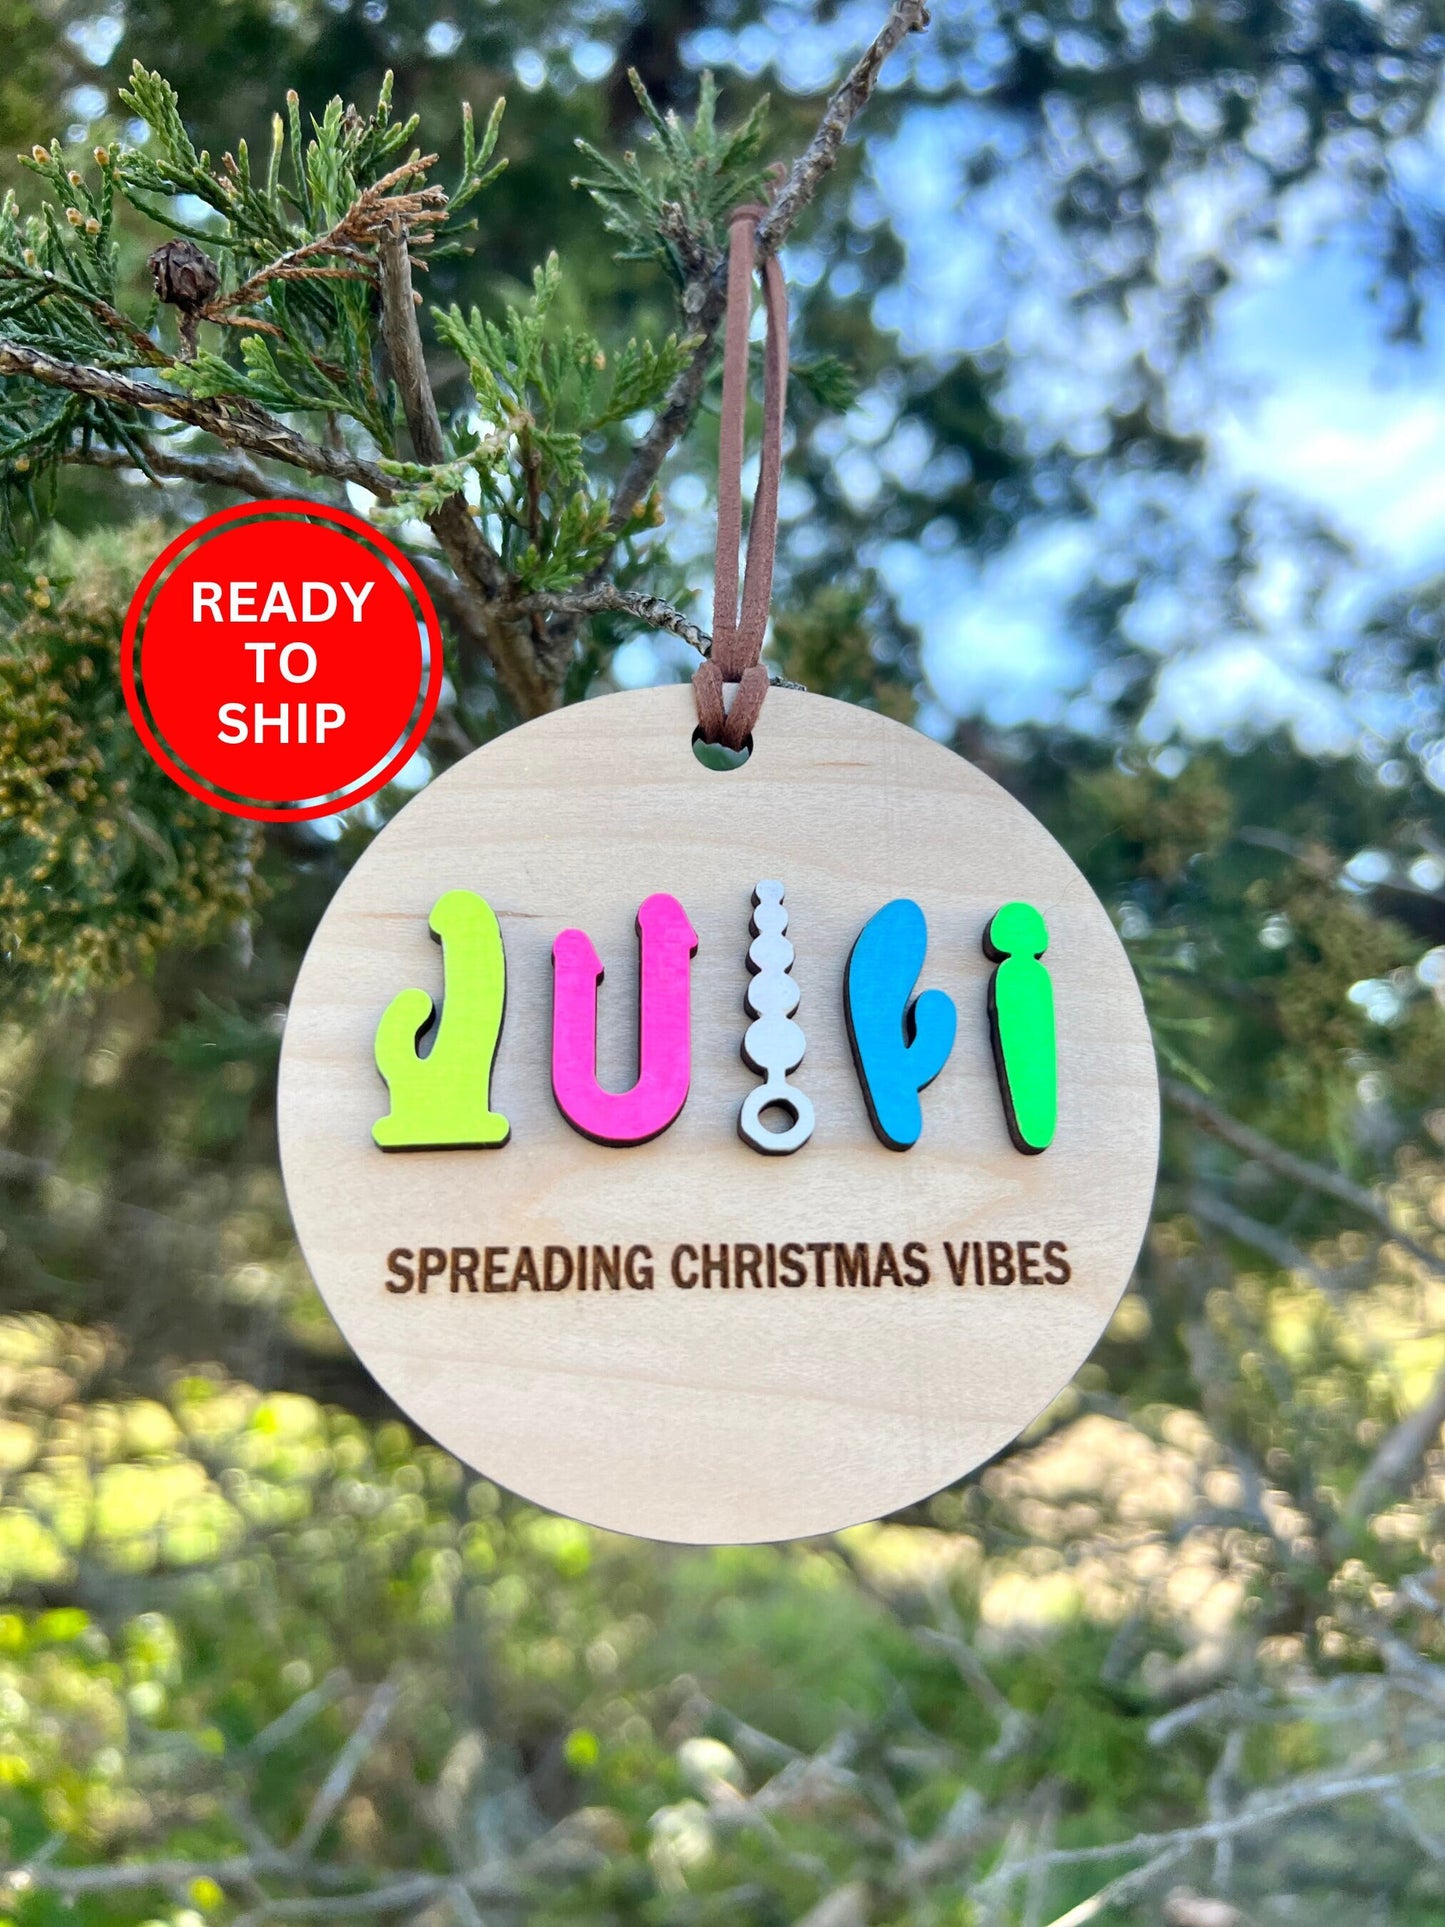 Christmas Vibes Adult Ornament, Sex Toy Ornament. Spicy Adult Humor Gift, Adult Humor Ornament, Single Lady Humor Gift